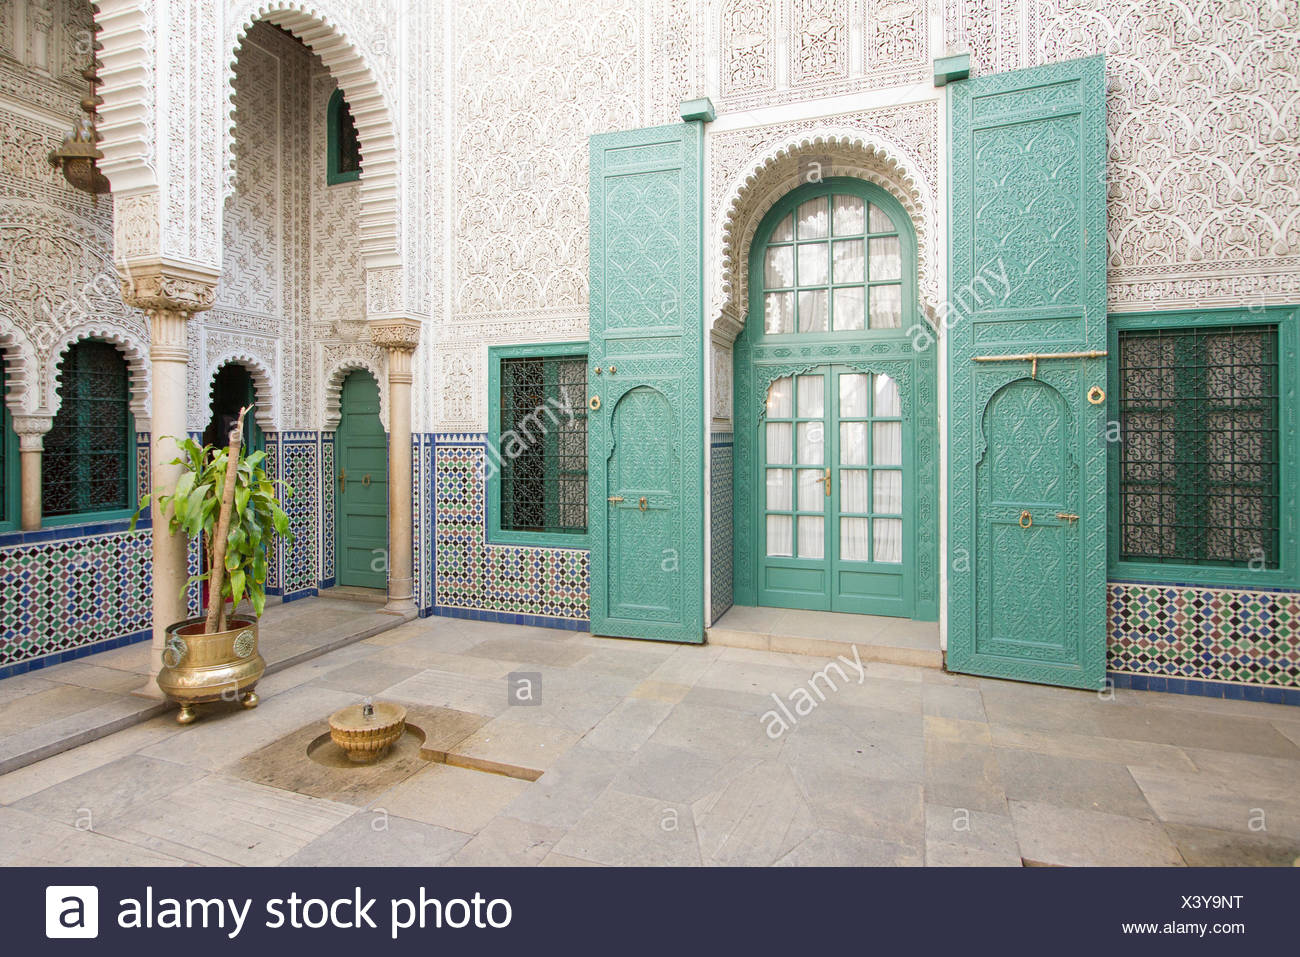 Ornate Wood And Tilework With Teal Windows And Doors From